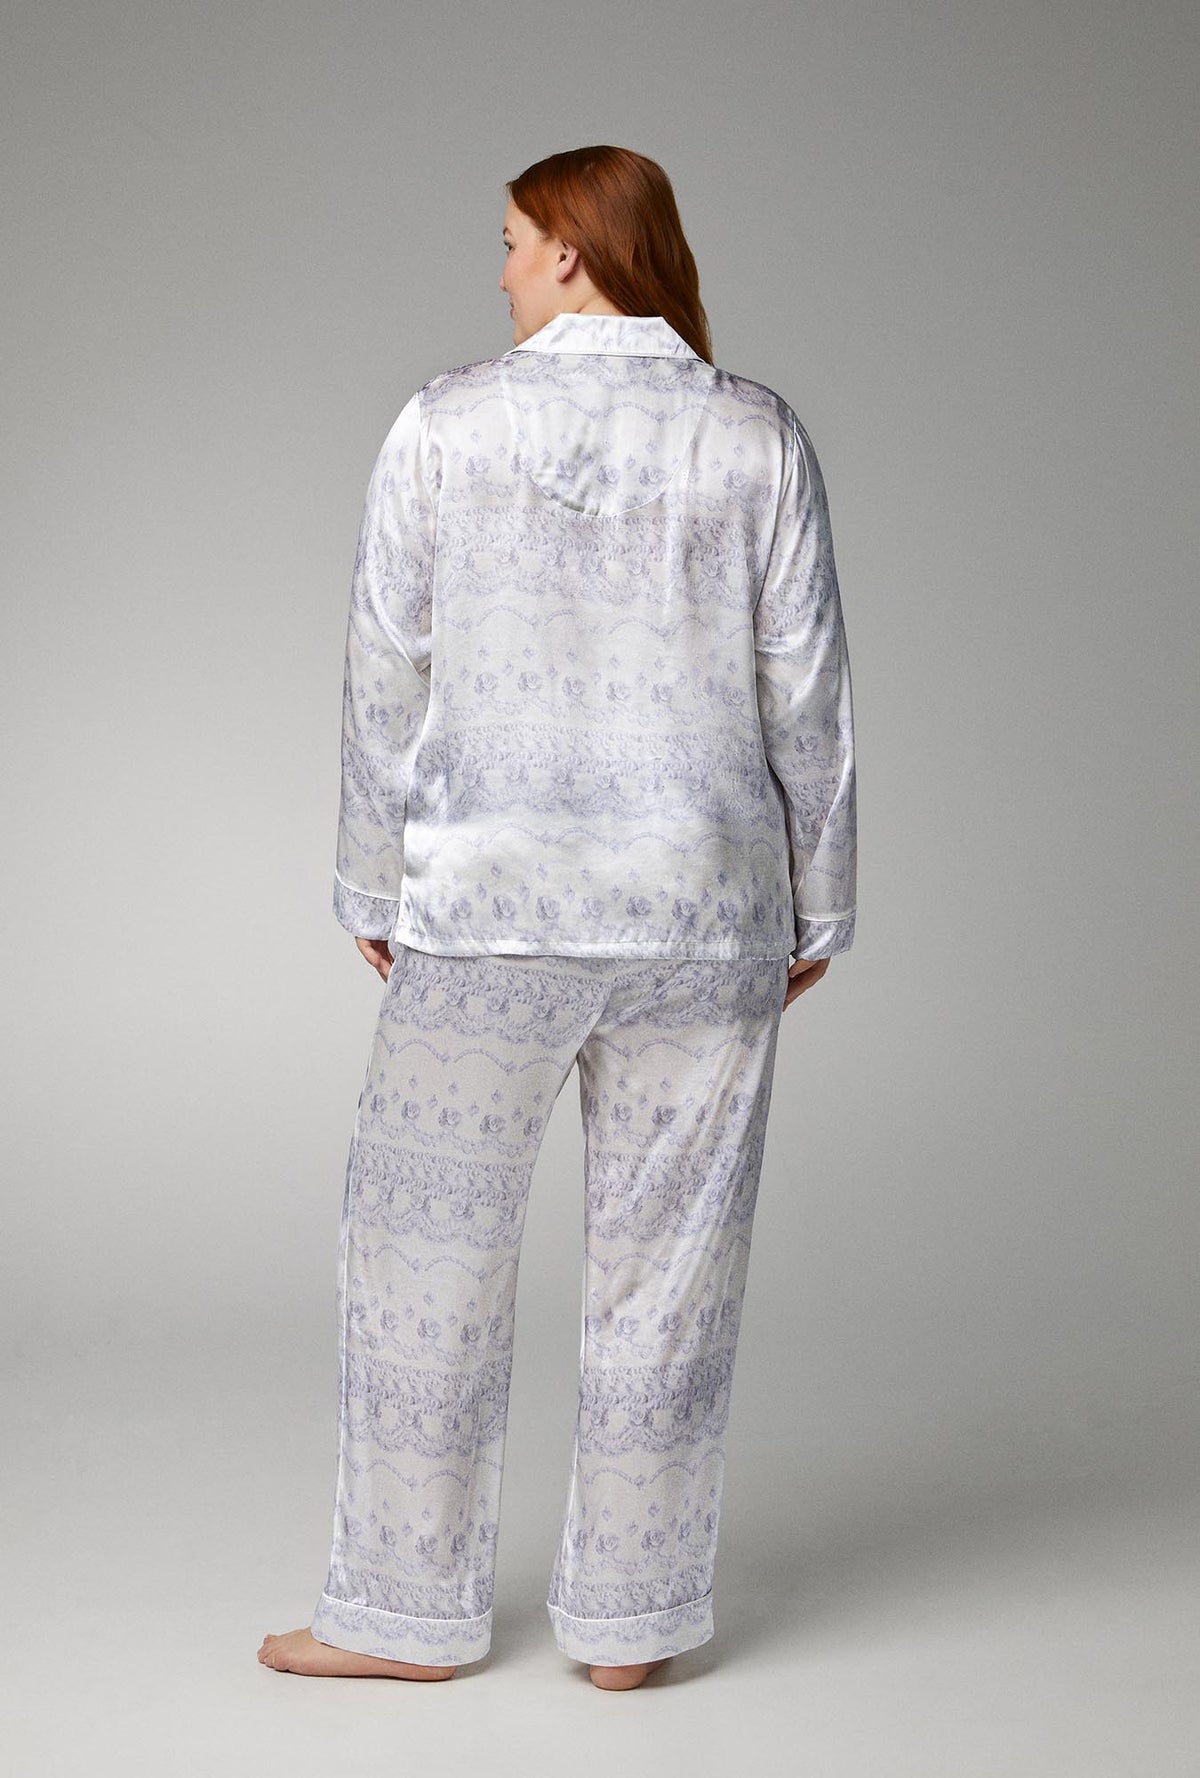 A lady wearing white long sleeve classic woven silk satin pj set with buttercream print